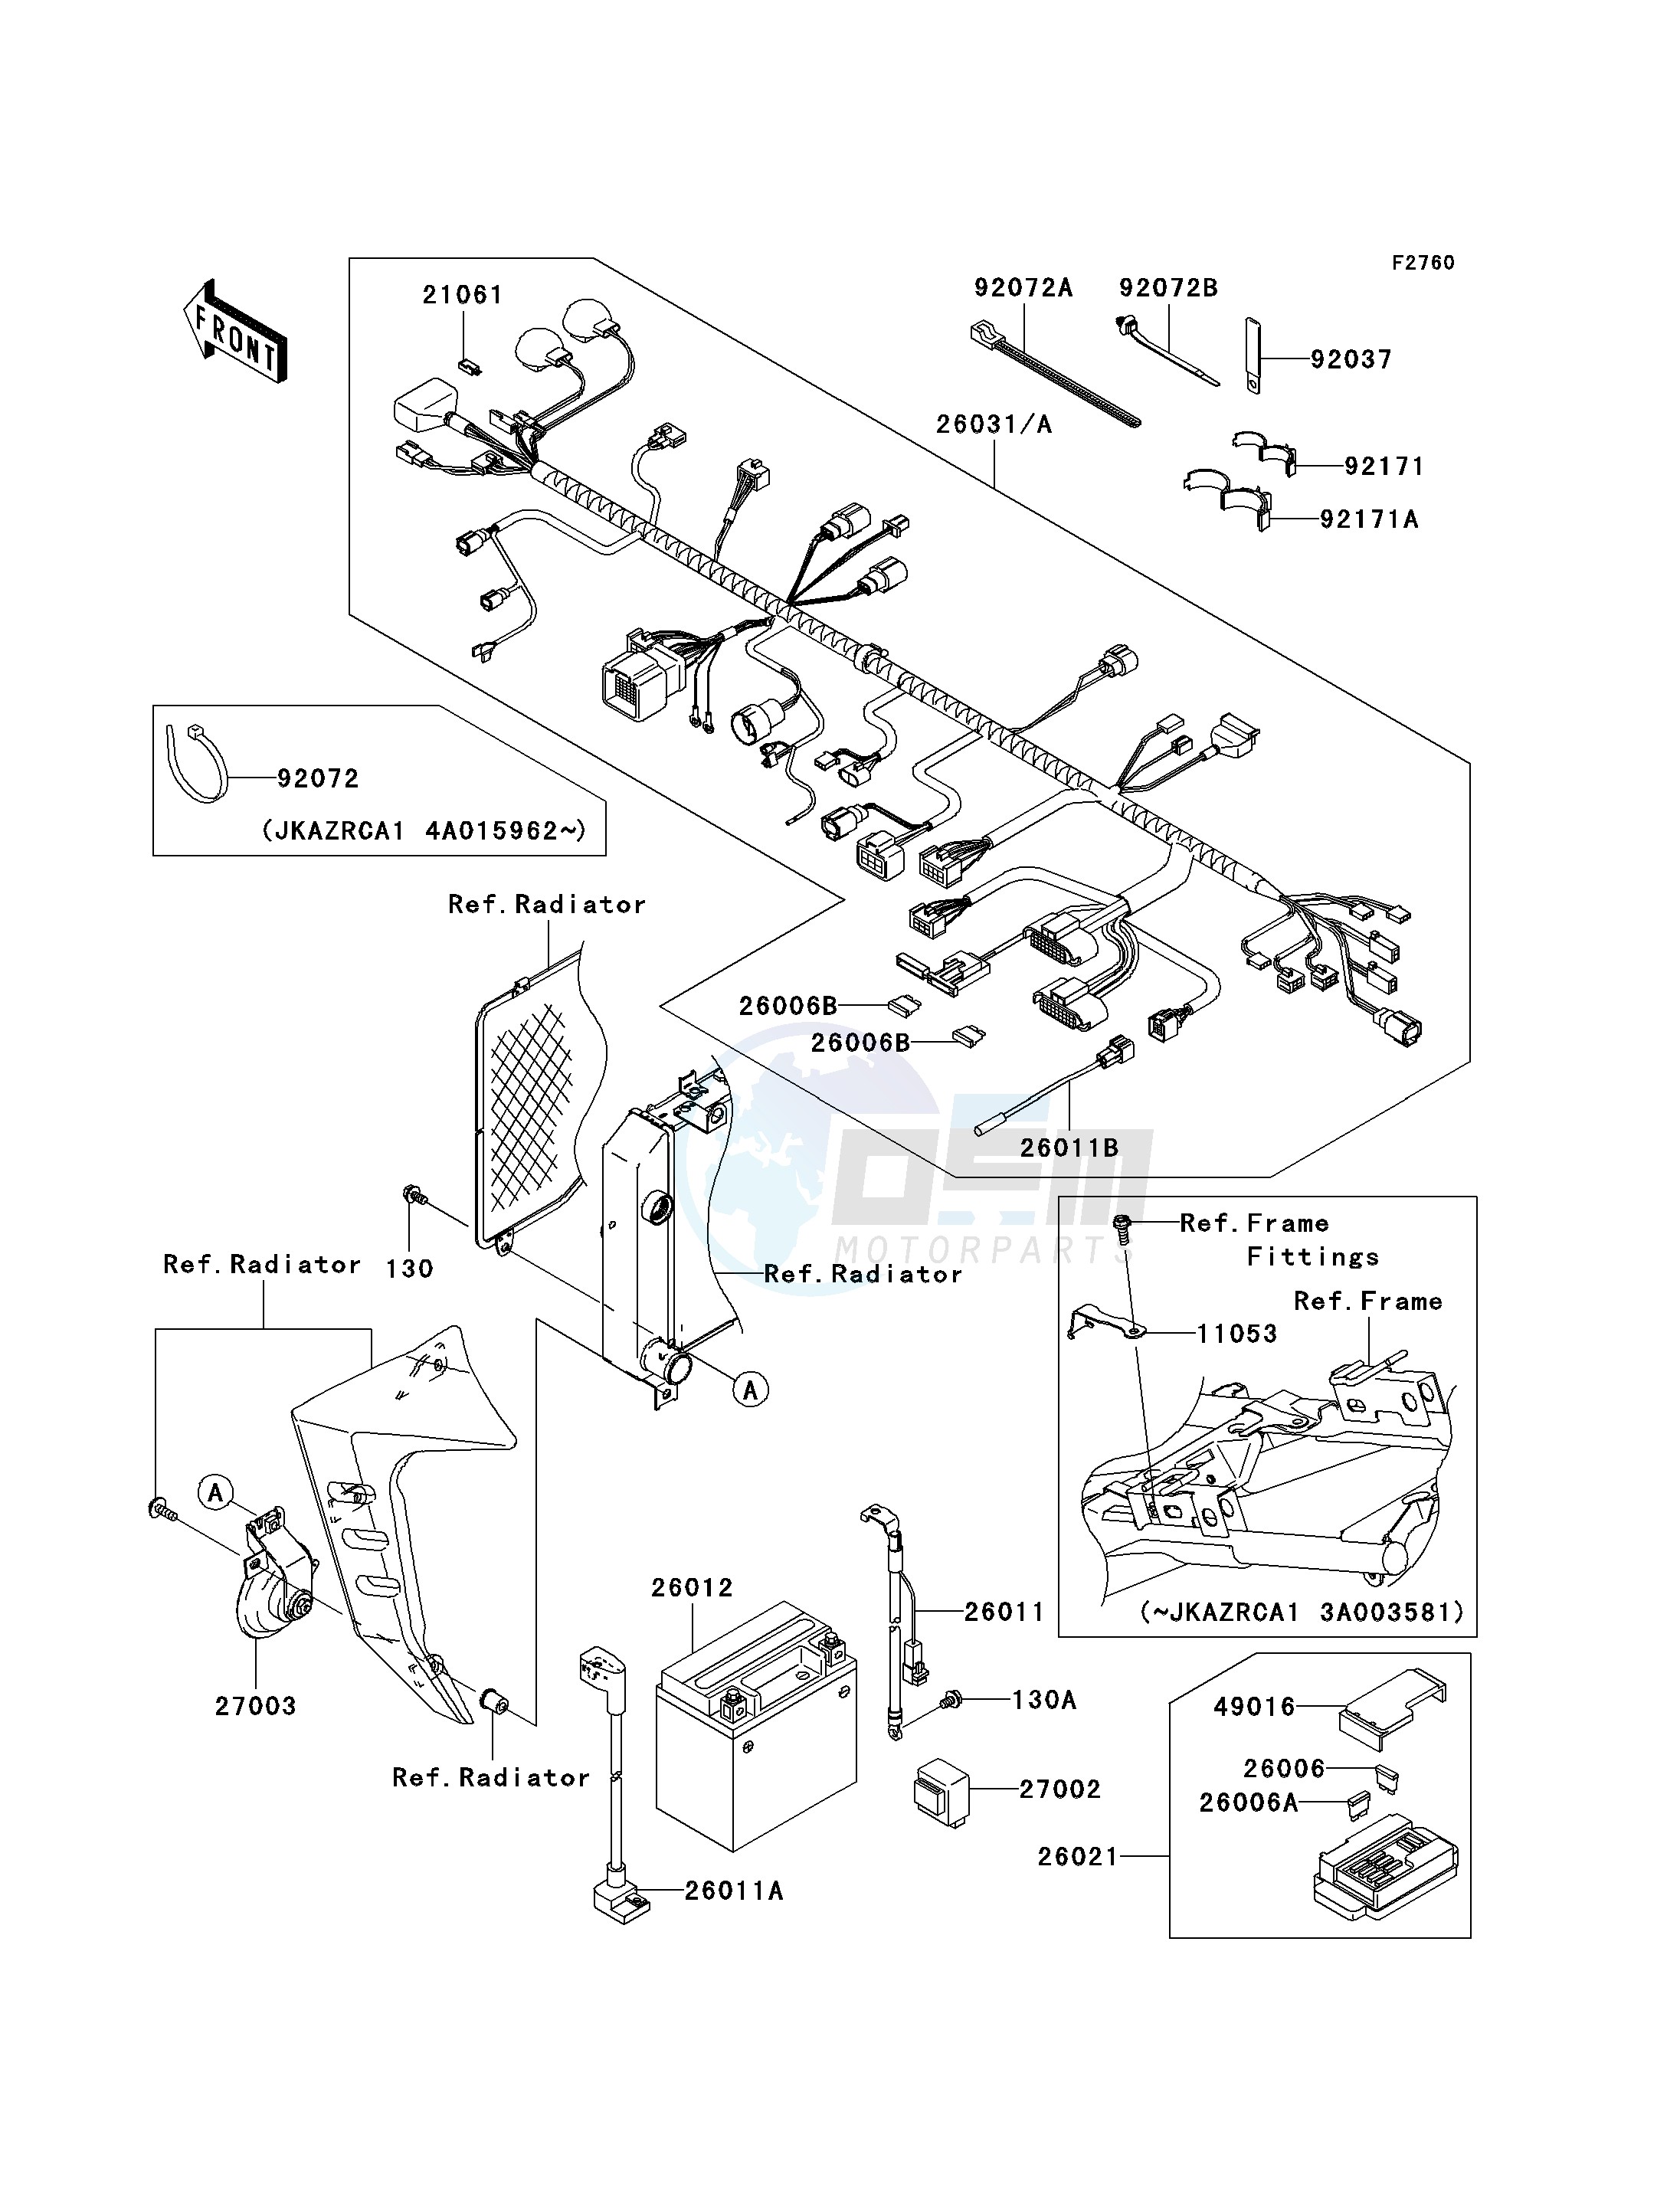 CHASSIS ELECTRICAL EQUIPMENT-- A1_A2- - blueprint